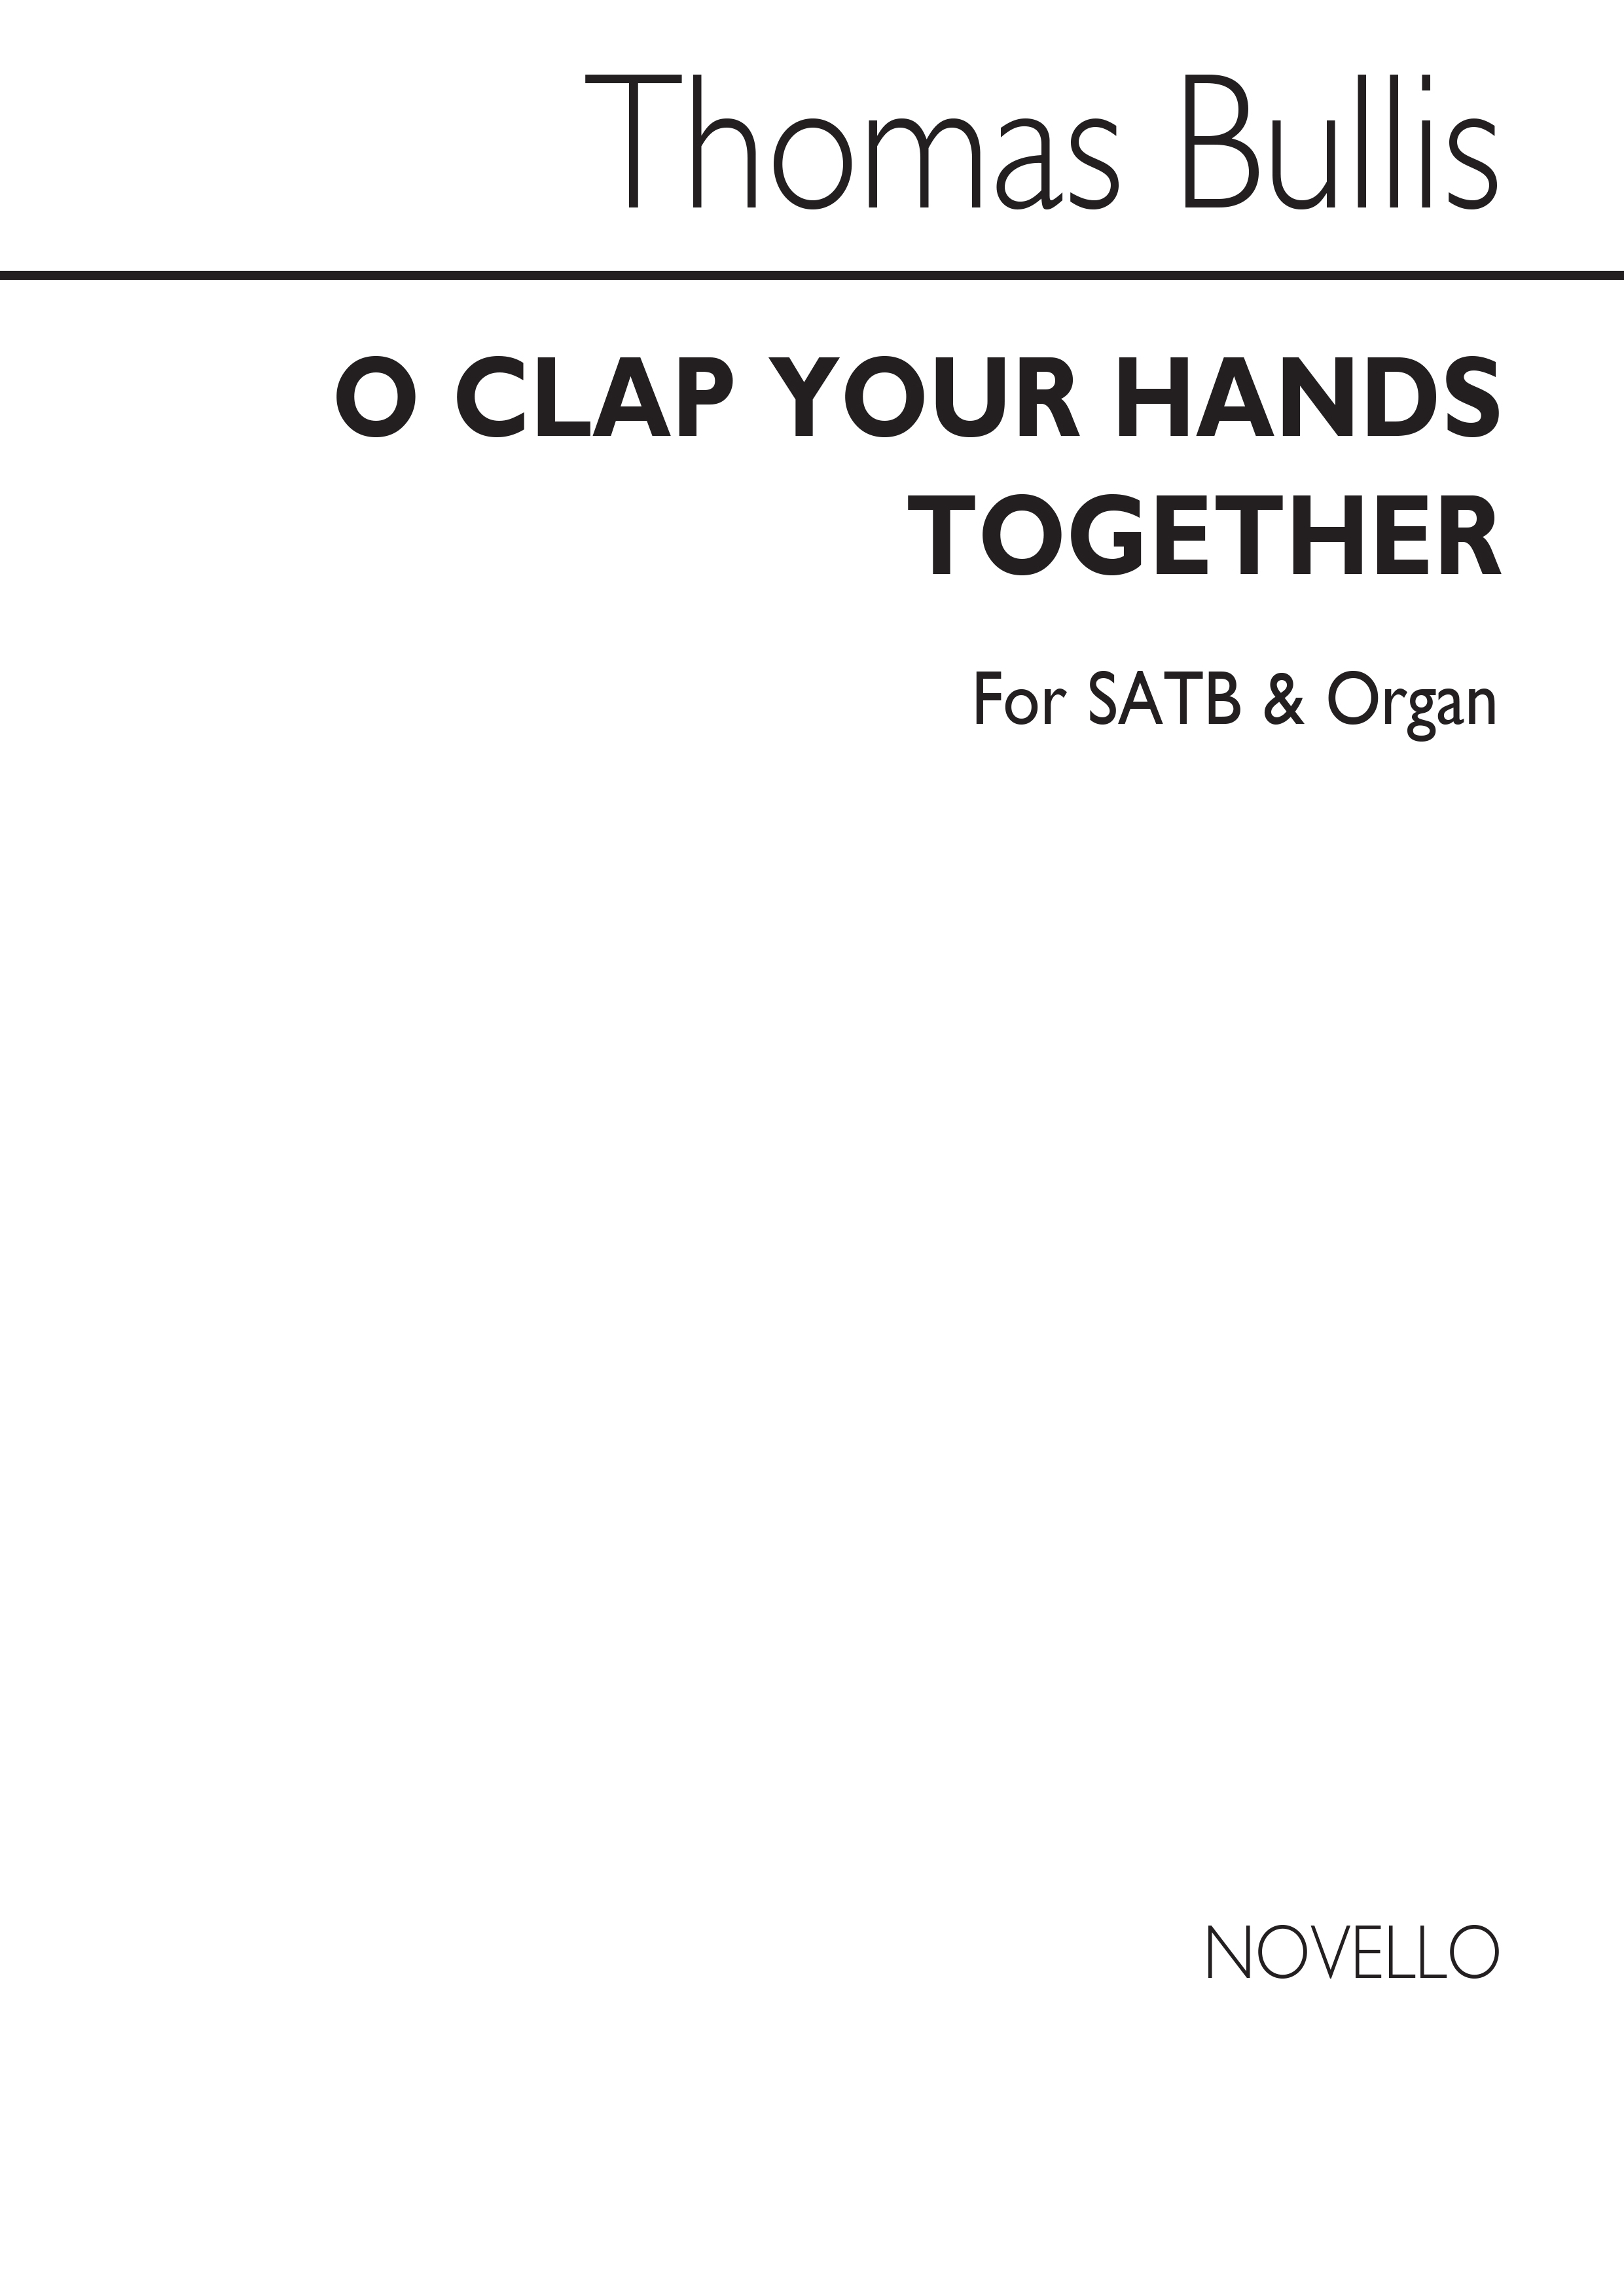 Bullis: O Clap Your Hands Together for SATB and Organ